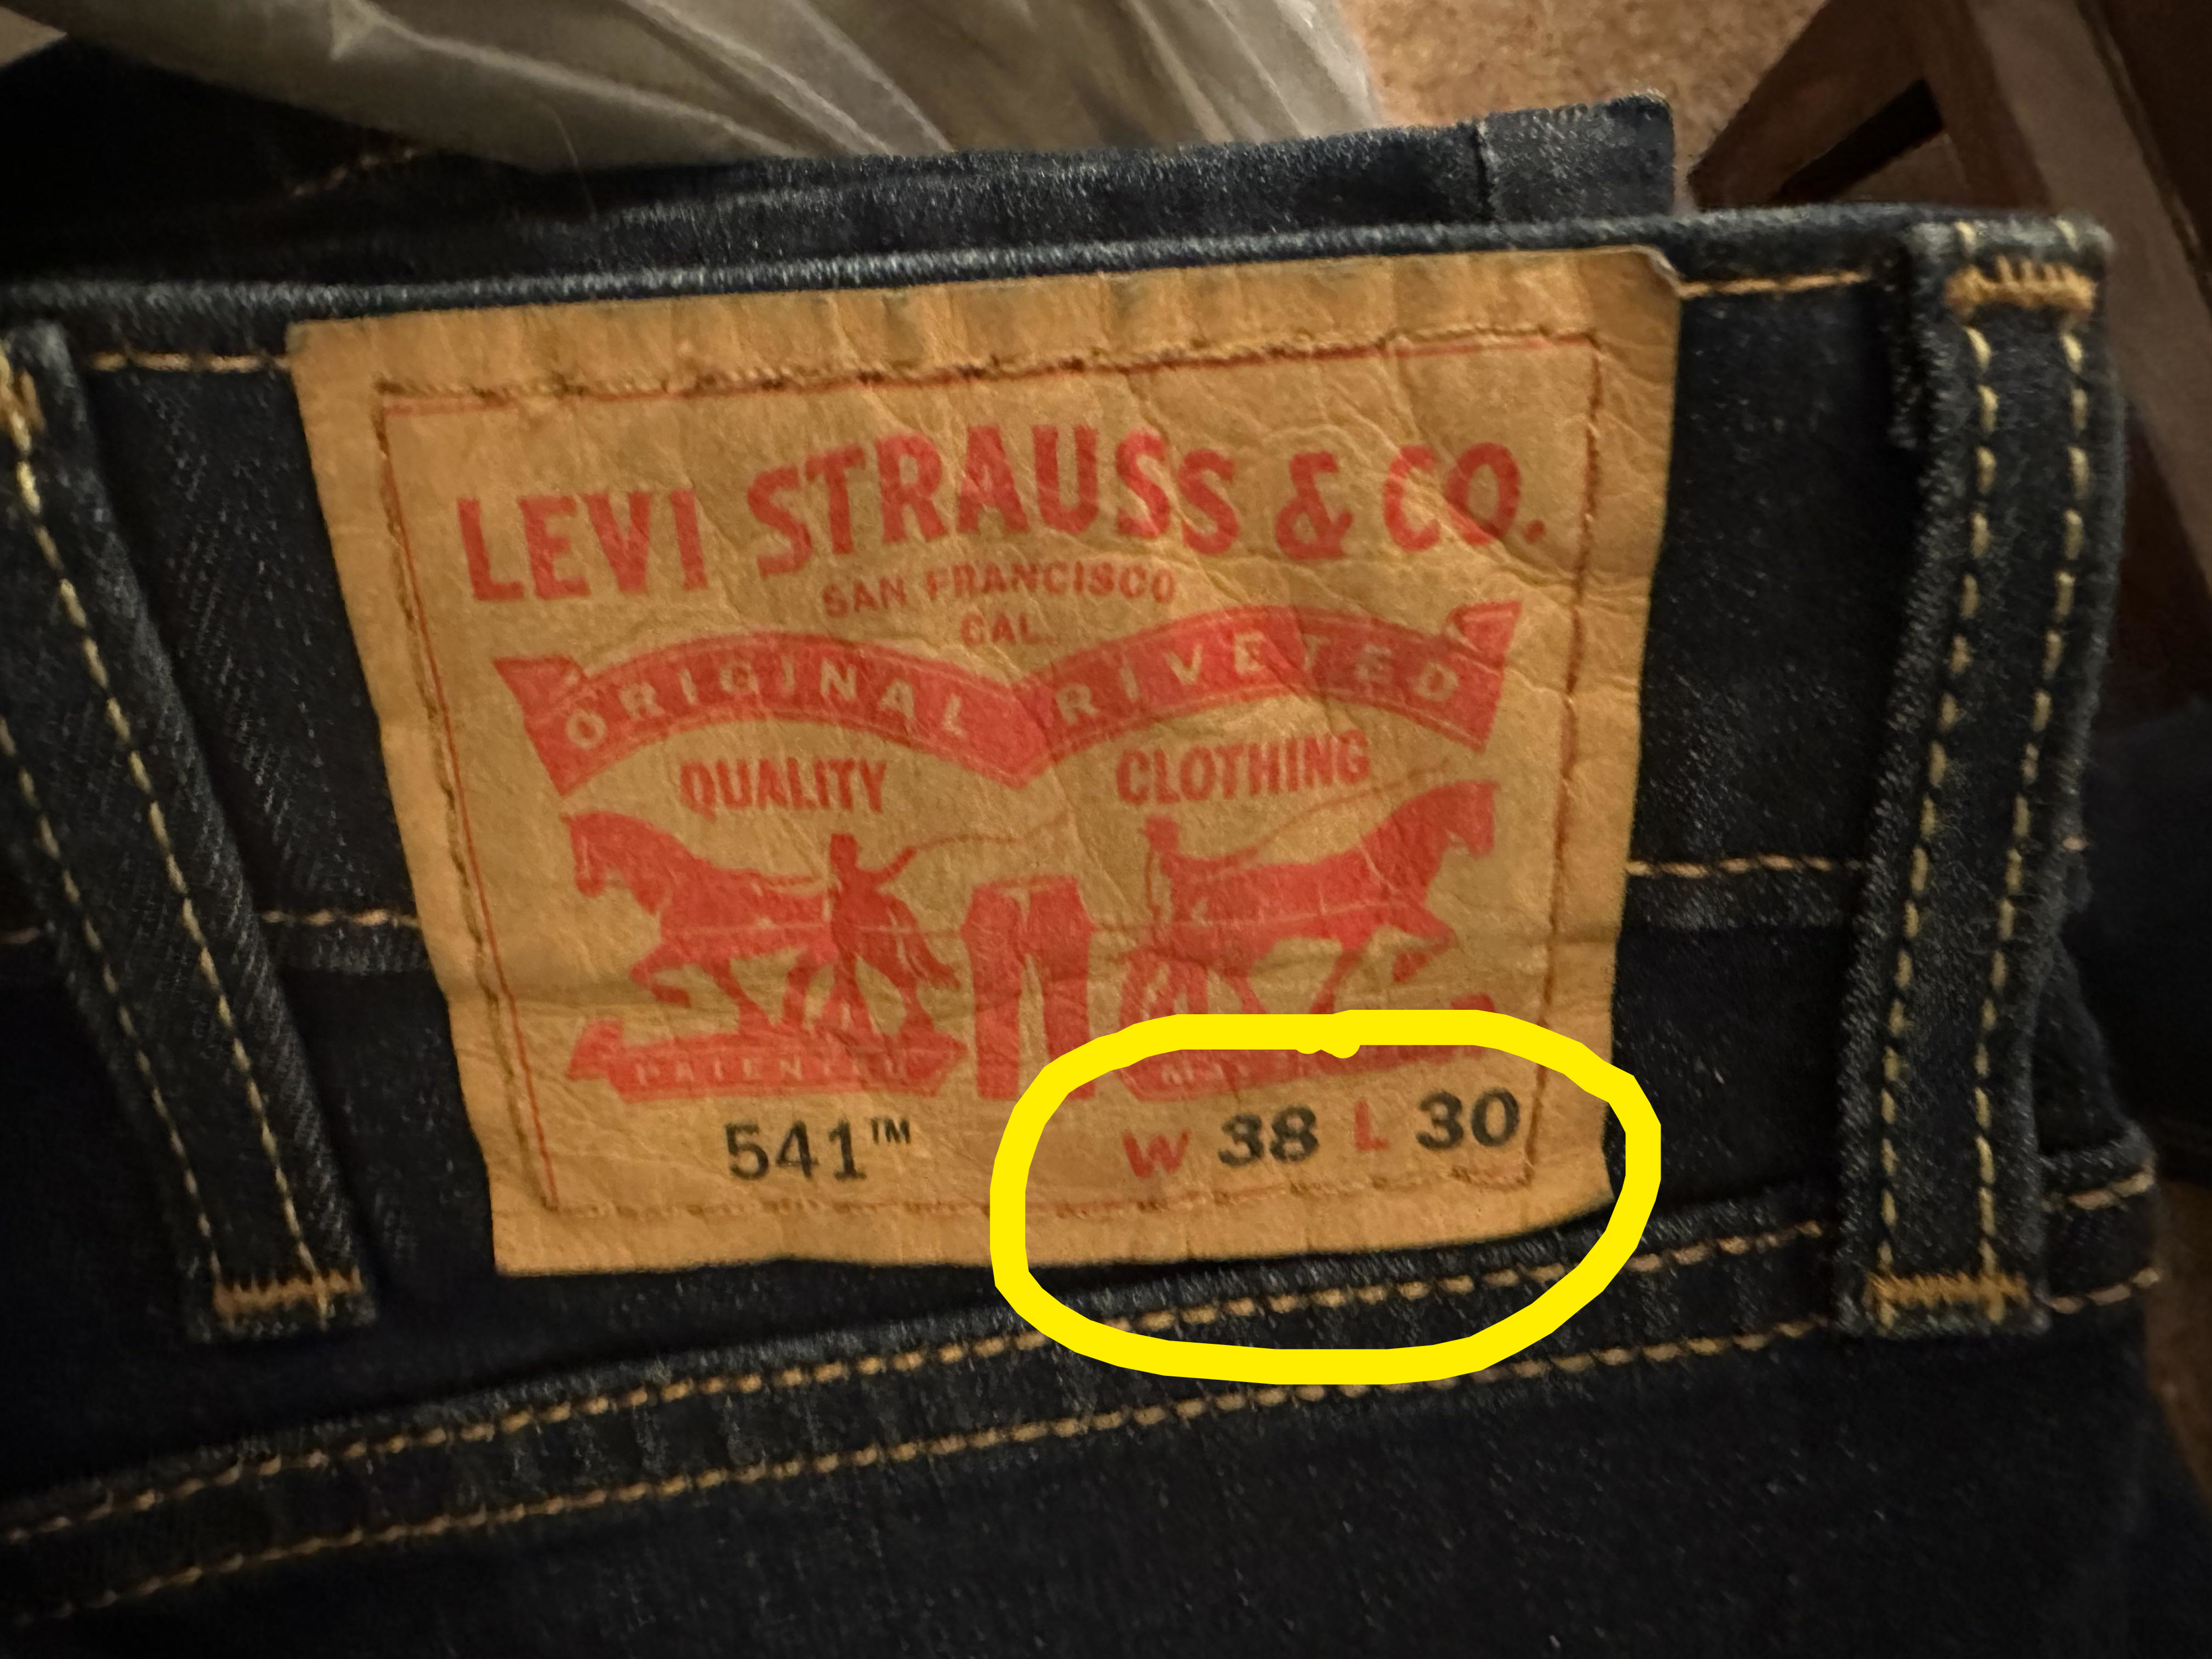 Levi Strauss &amp;amp; Co. brand label on jeans with size and model information